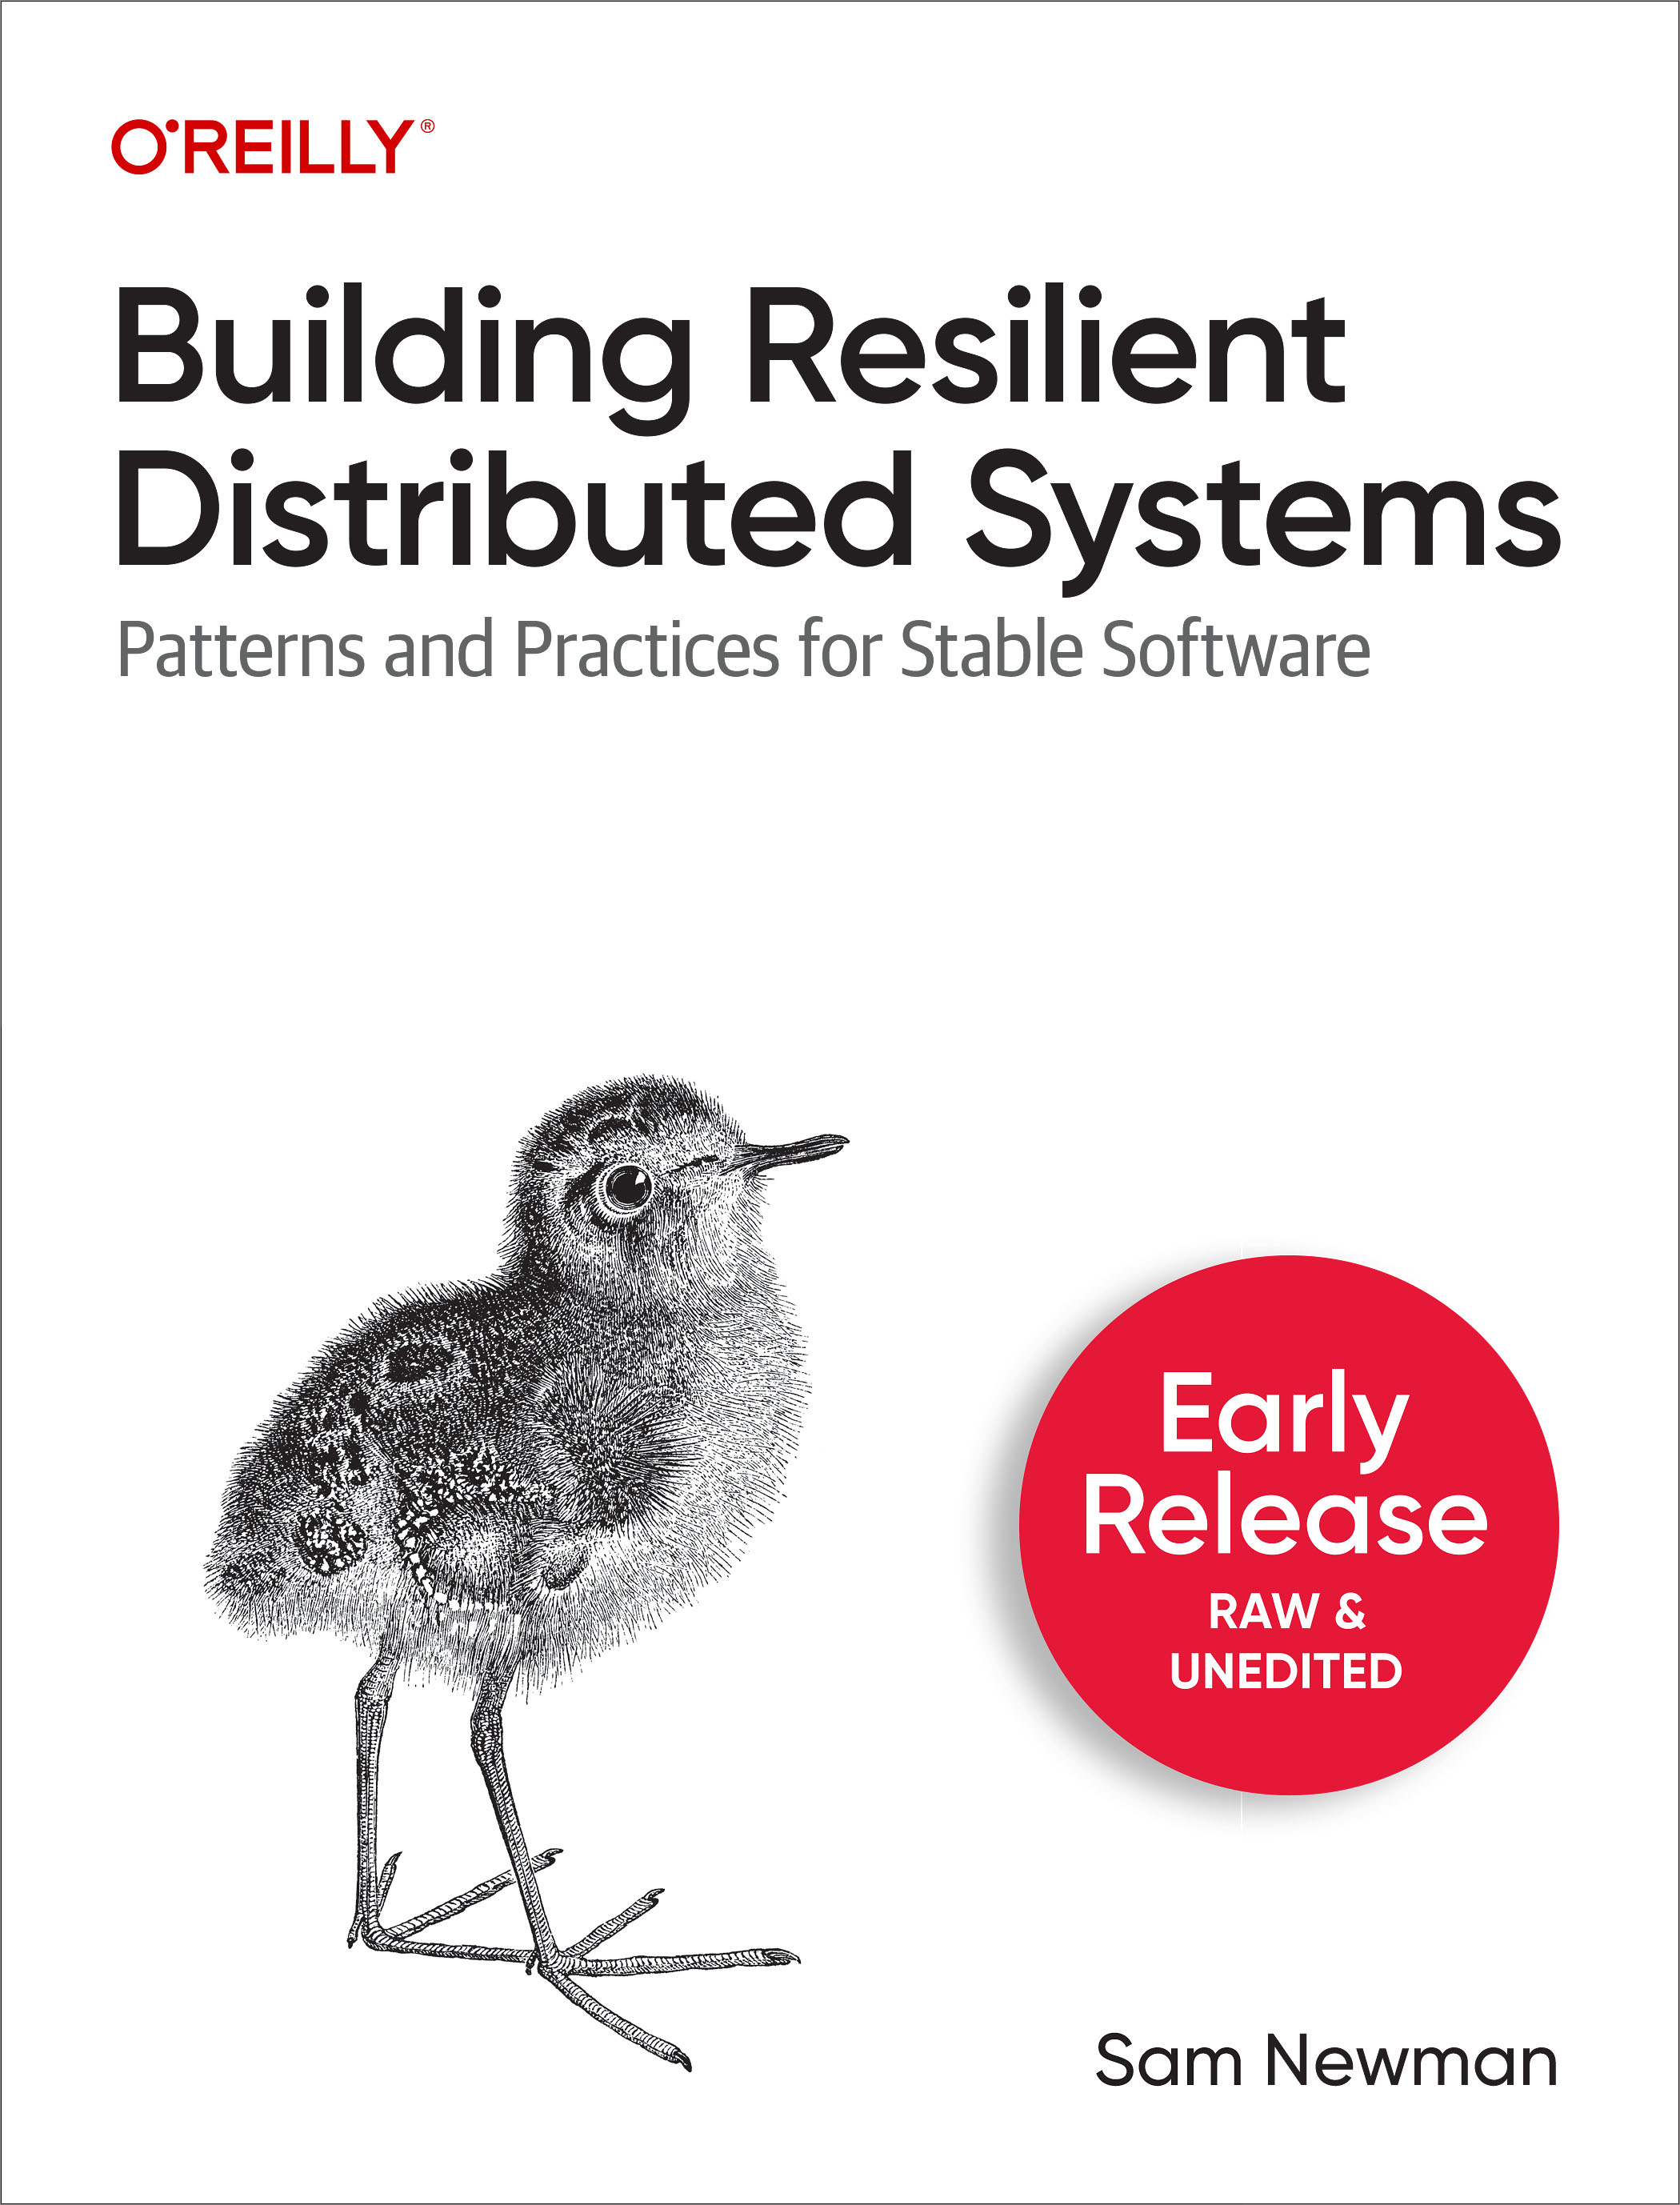 Building Resilient Distributed Systems, a new book by Sam Newman, published by O'Reilly